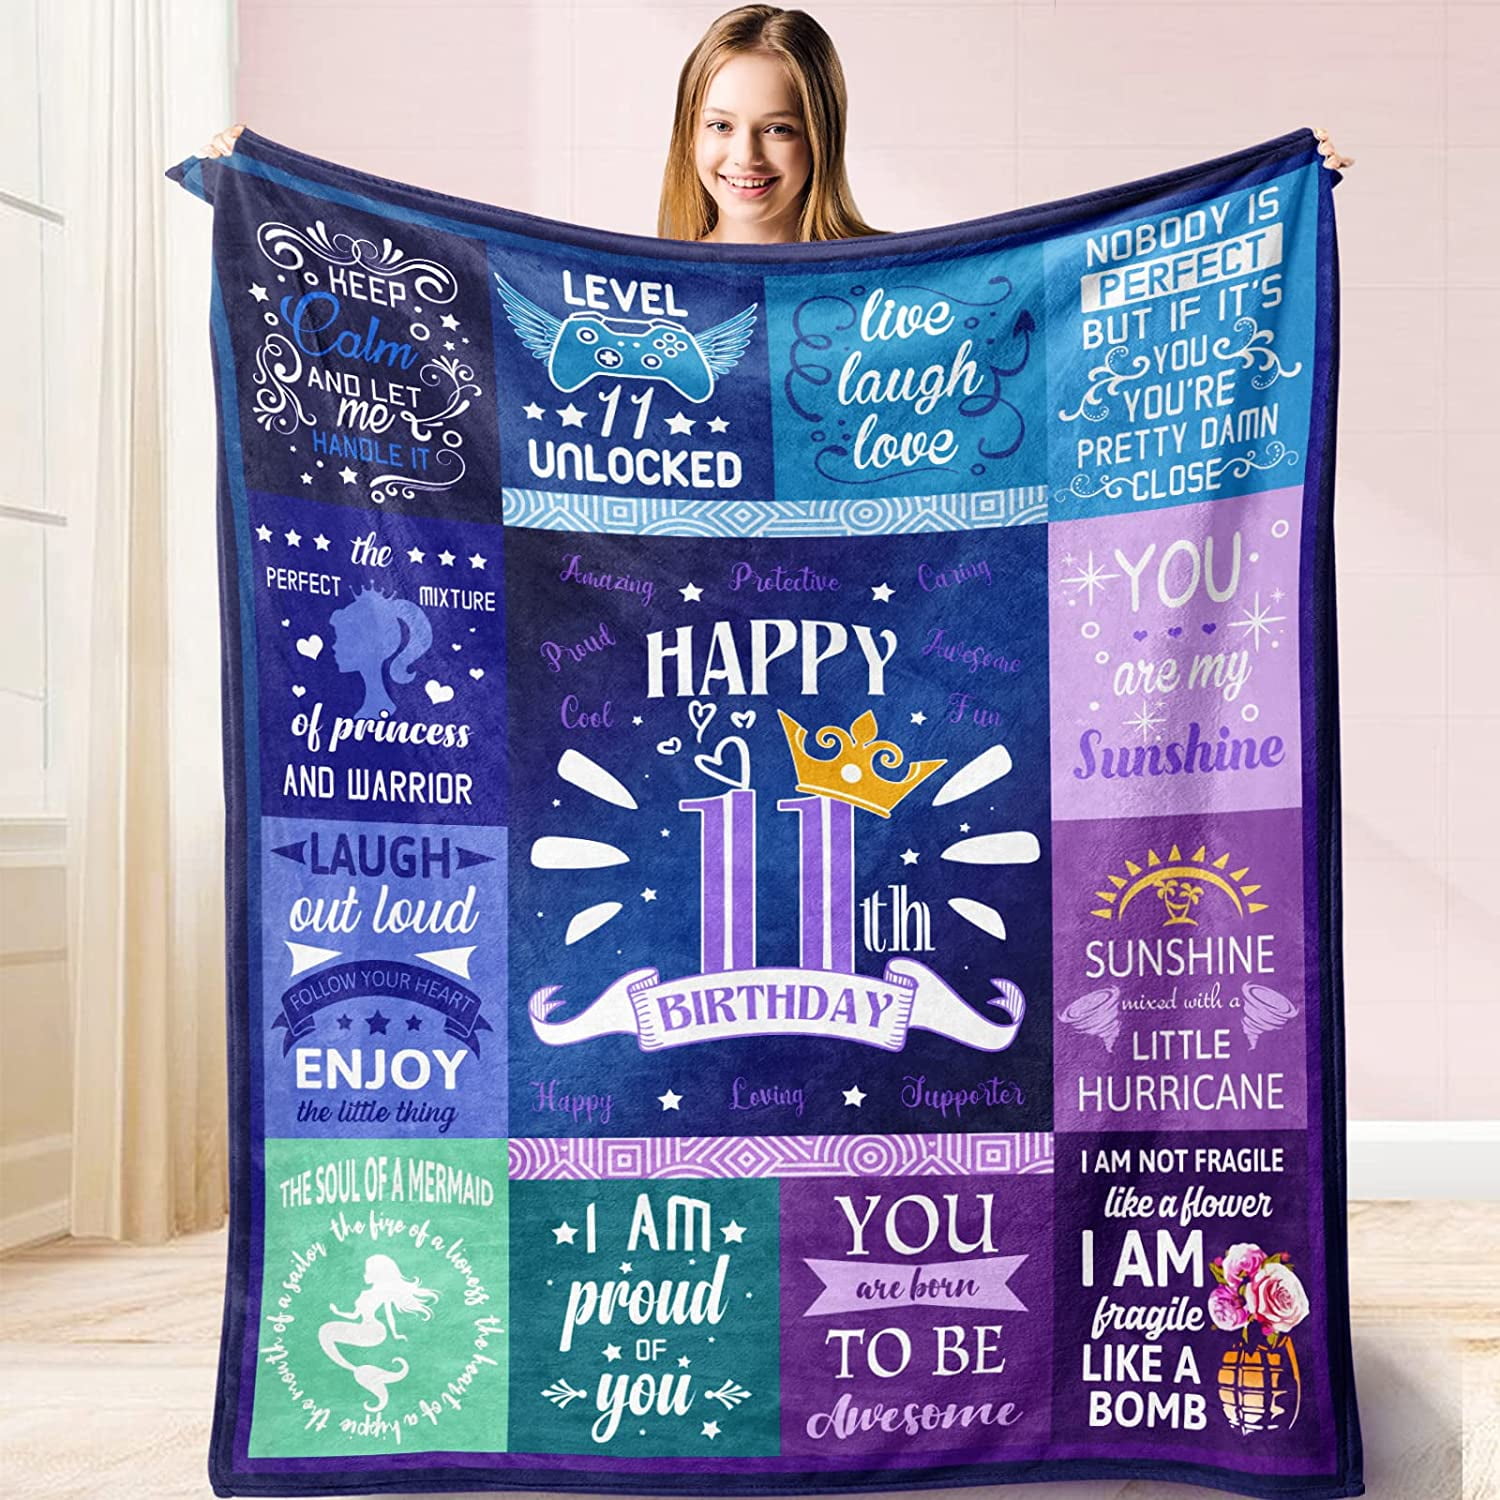 Rqhoqci 11 Year Old Girl Gift Ideas, Gifts for 11 Year Old Girls Blanket,  Birthday Gifts for 11 Year Old Girls, 11th Birthday Gift for Girls, 11th